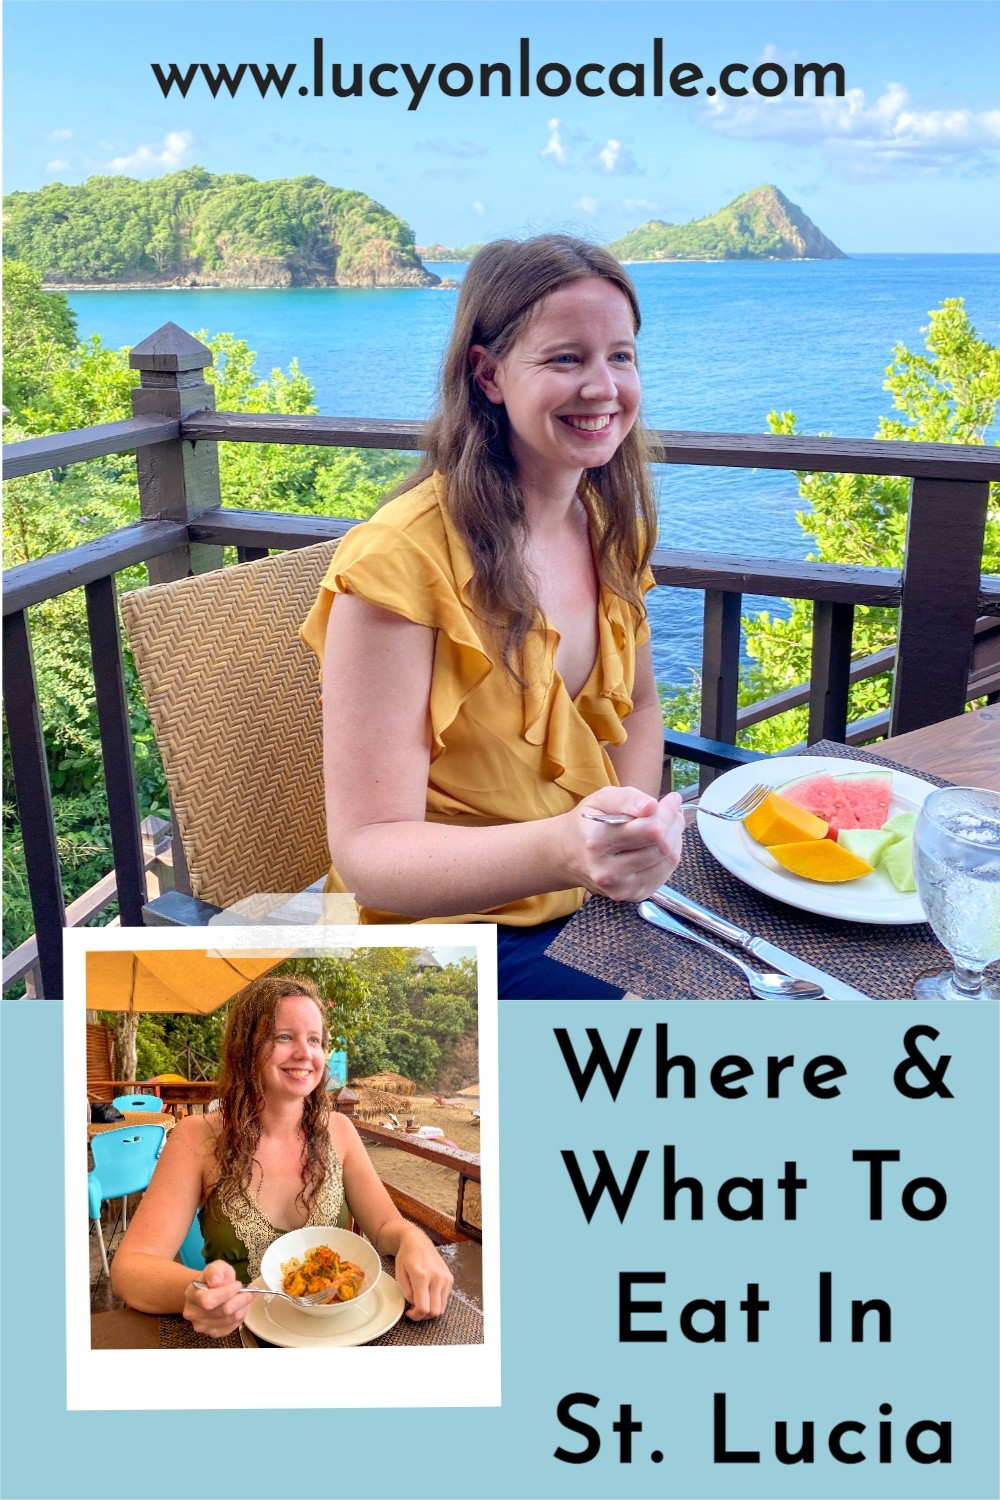 What and where to eat in Saint Lucia